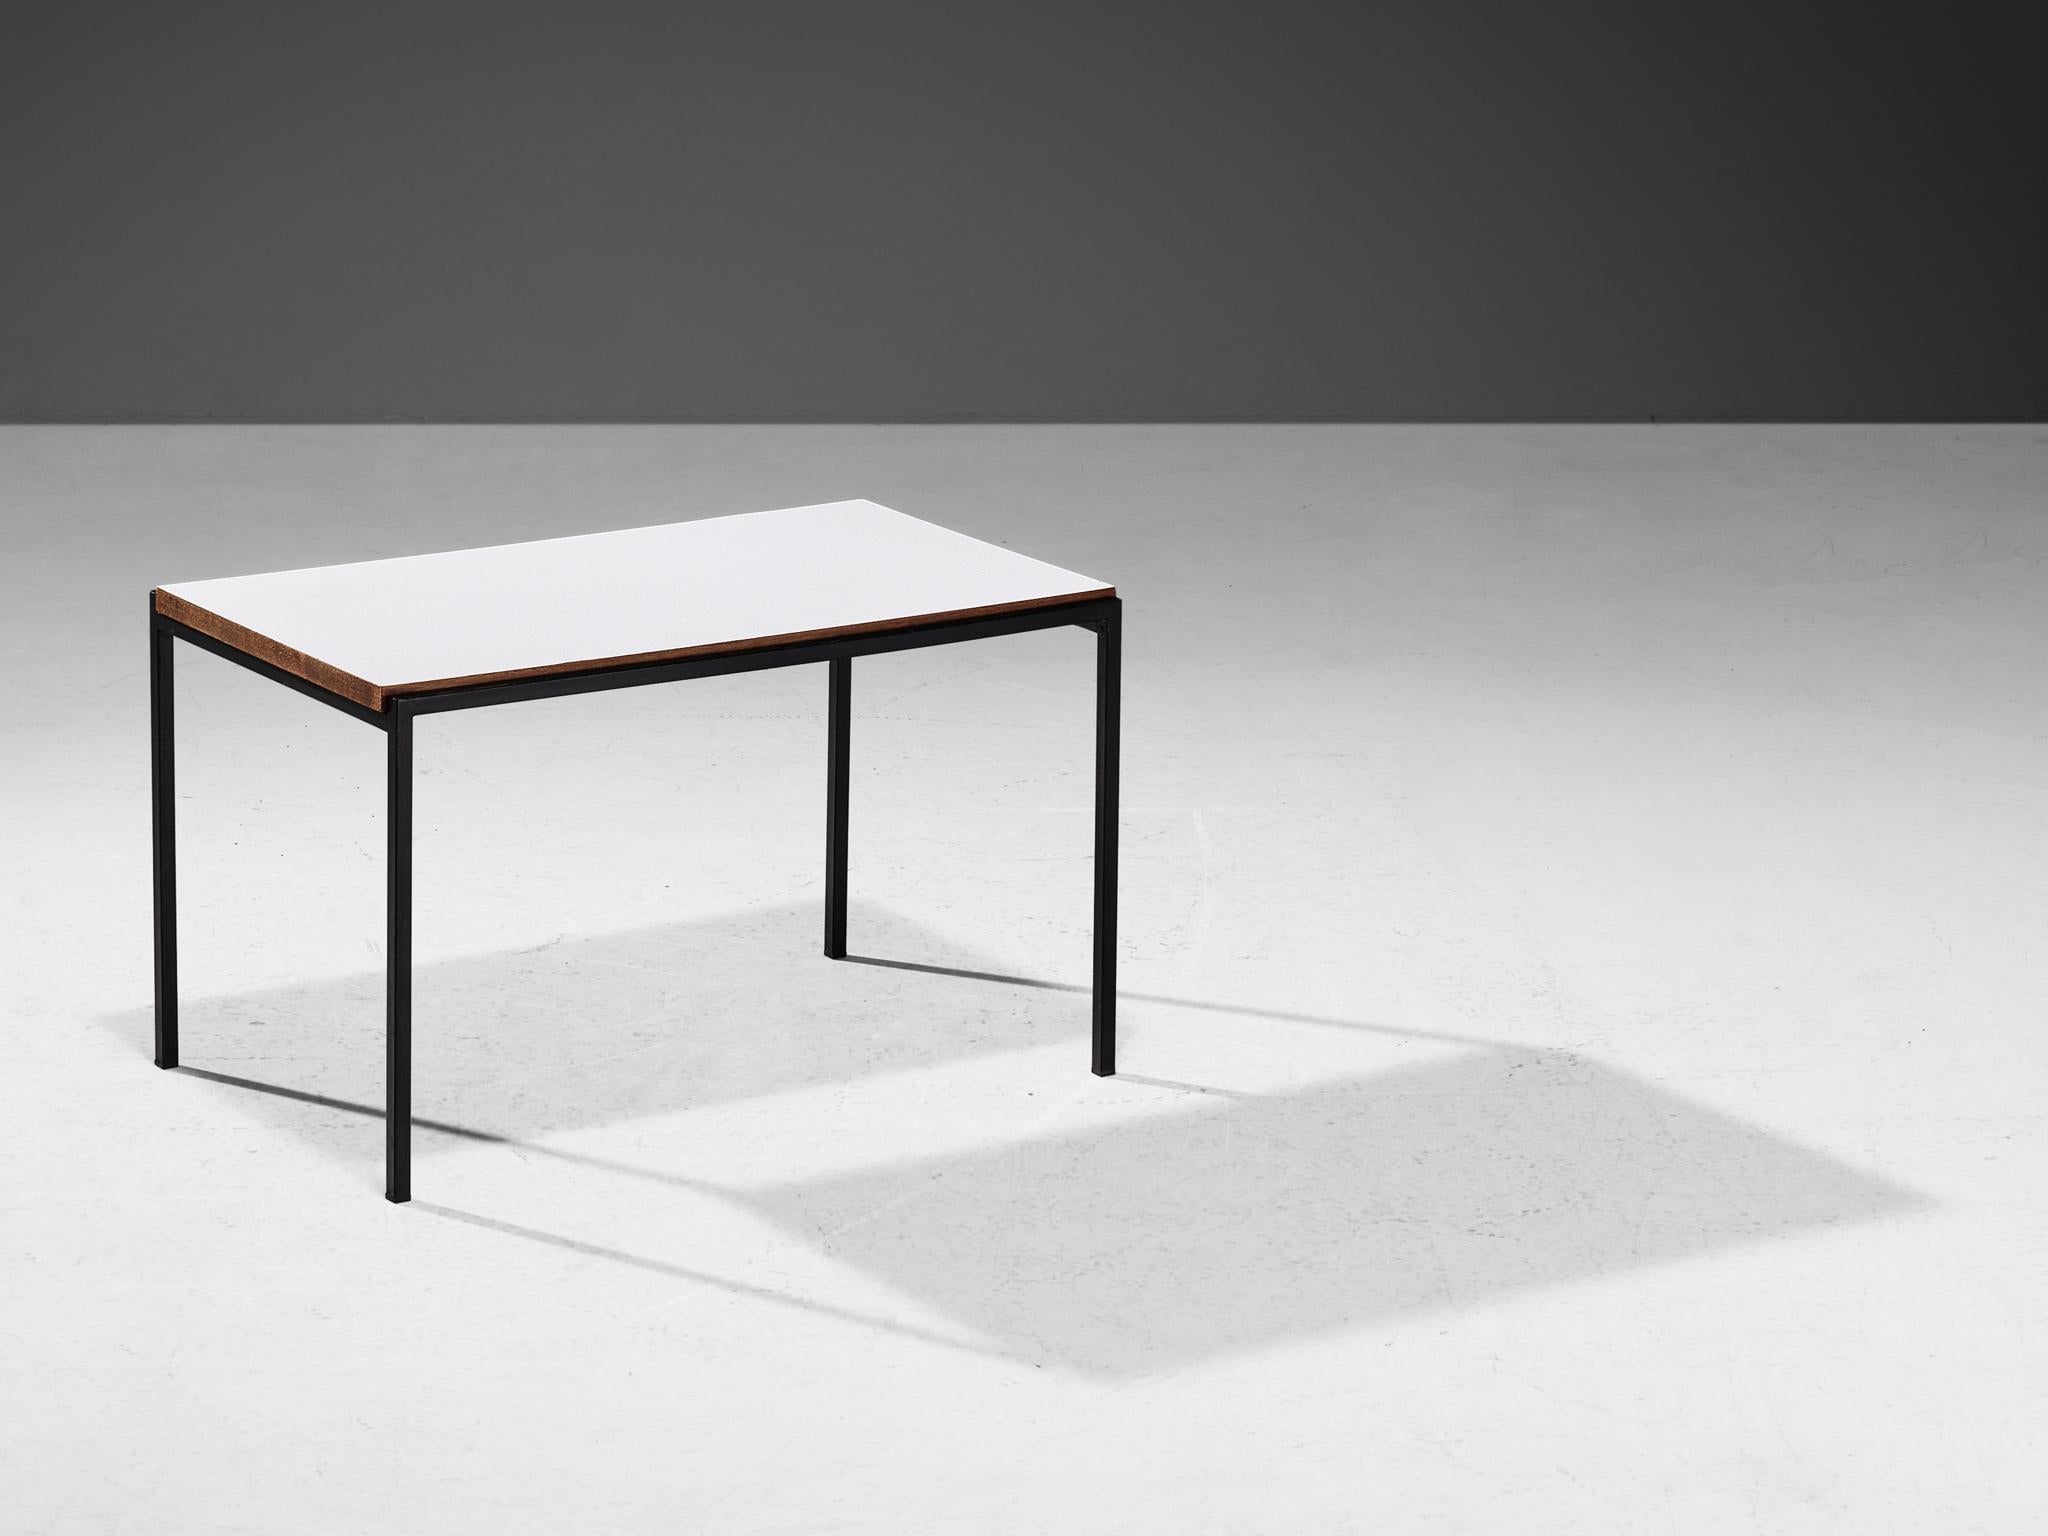 Coffee table, iron, laminated wood, wood, The Netherlands, 1960s

A simplistic Dutch side or coffee table consisting of a black iron frame with a white laminated top. The wooden top is partially levitating in the metal frame, which makes it